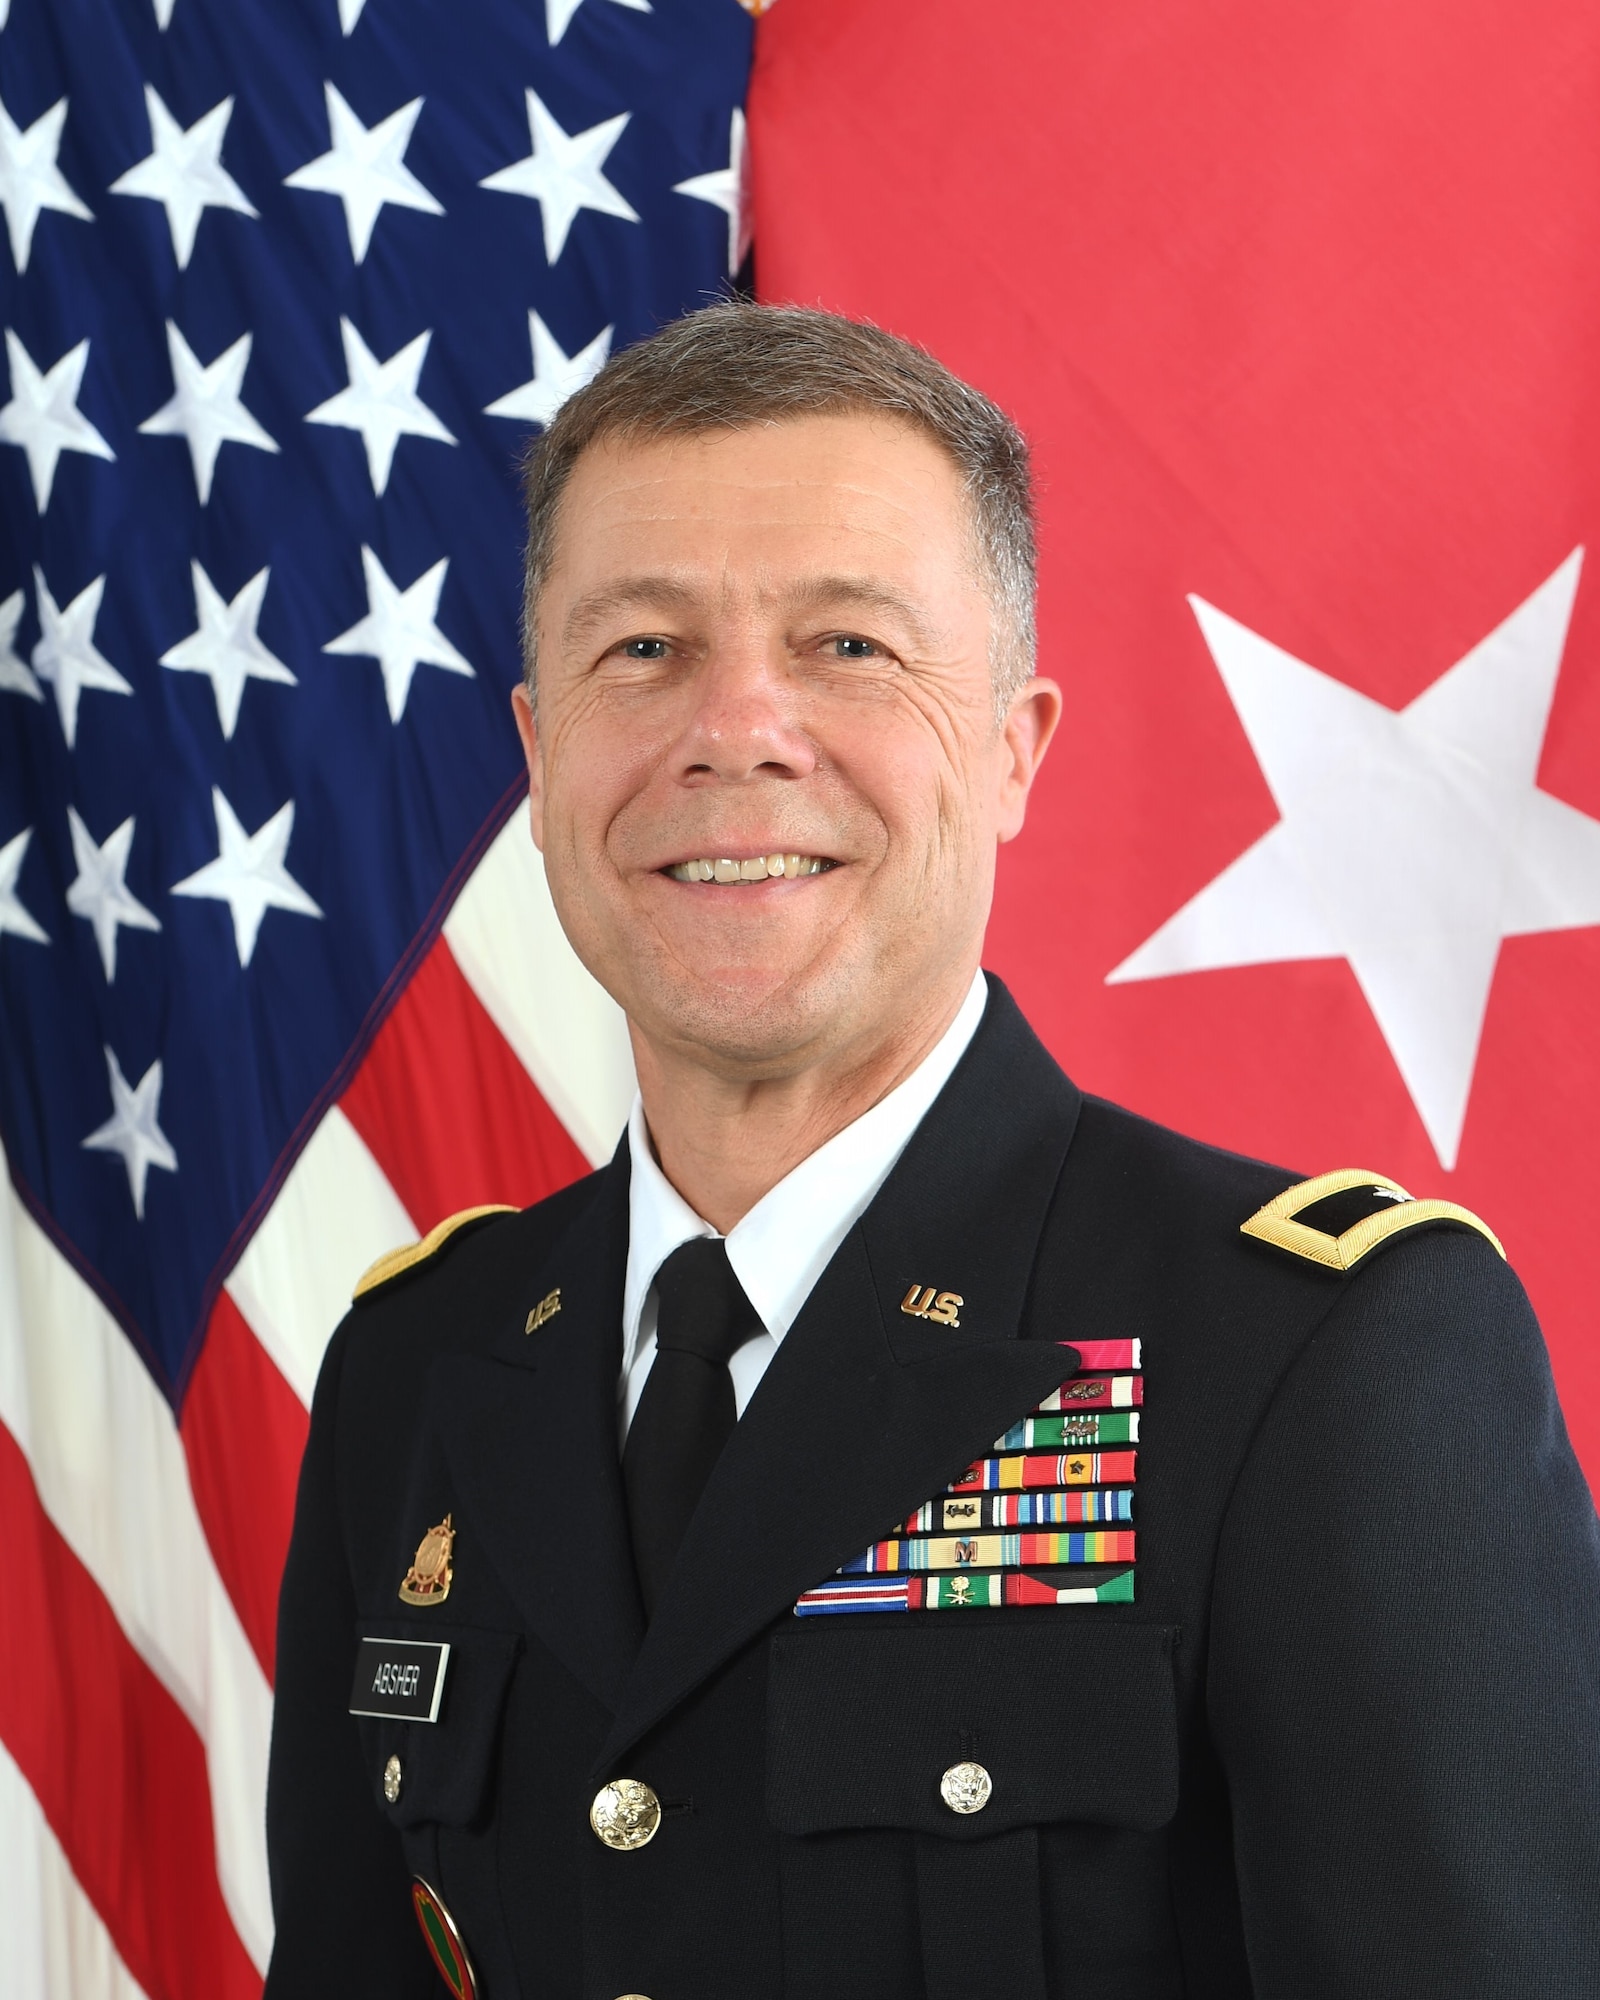 Official photograph of Brig. Gen. Donald B. Absher, United States Army Reserve.  (U.S. Army photo)